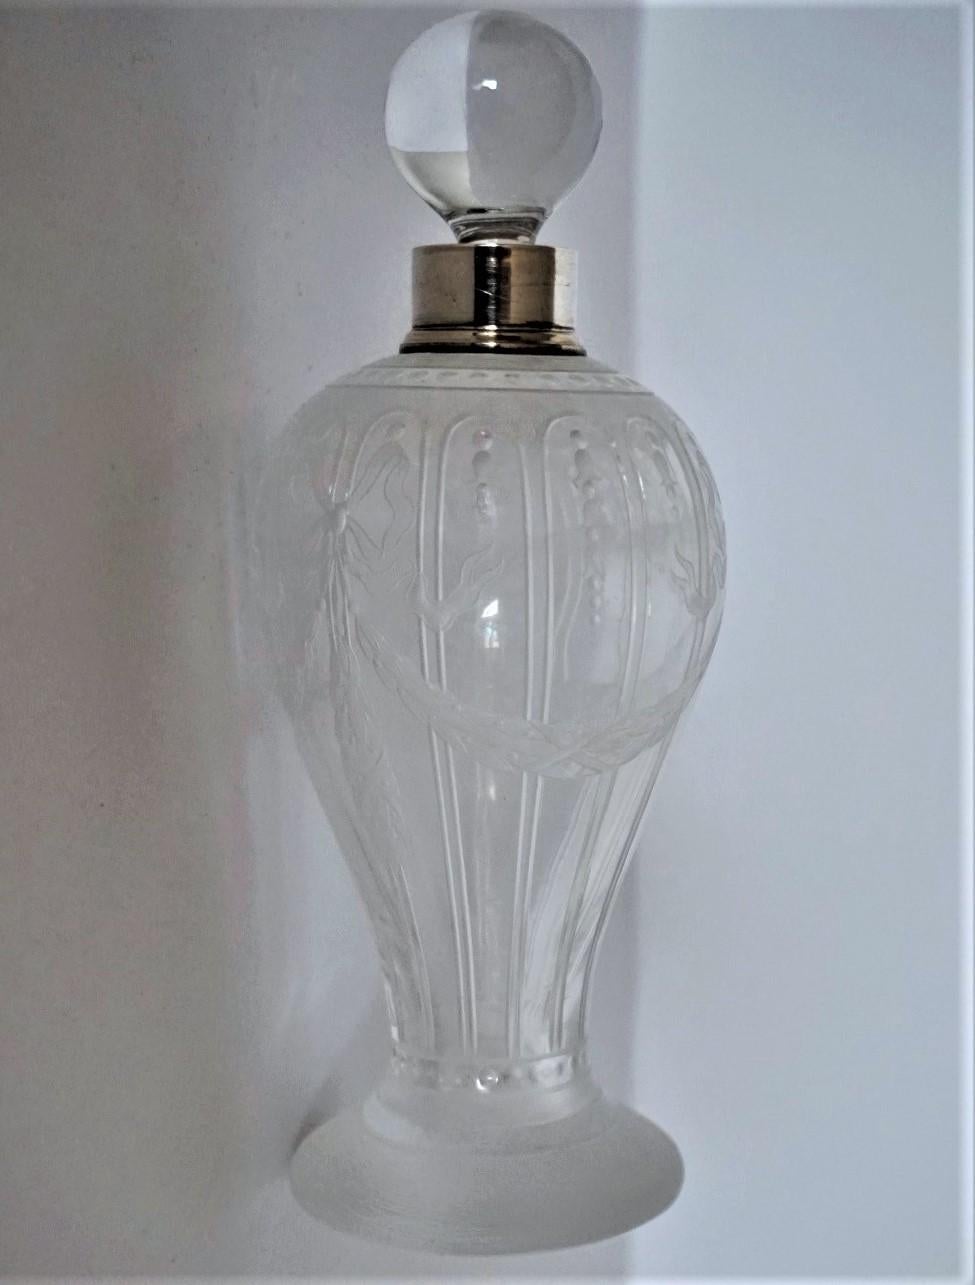 Large Art Deco clear and frosted crystal glass perfume bottle, beautifully high relief engraved with elegant motifs, wreaths and bows, France, 1920-1929. Neck with sterling silver mount, clear crystal glass sphere stopper.
Measures: Height 7.50